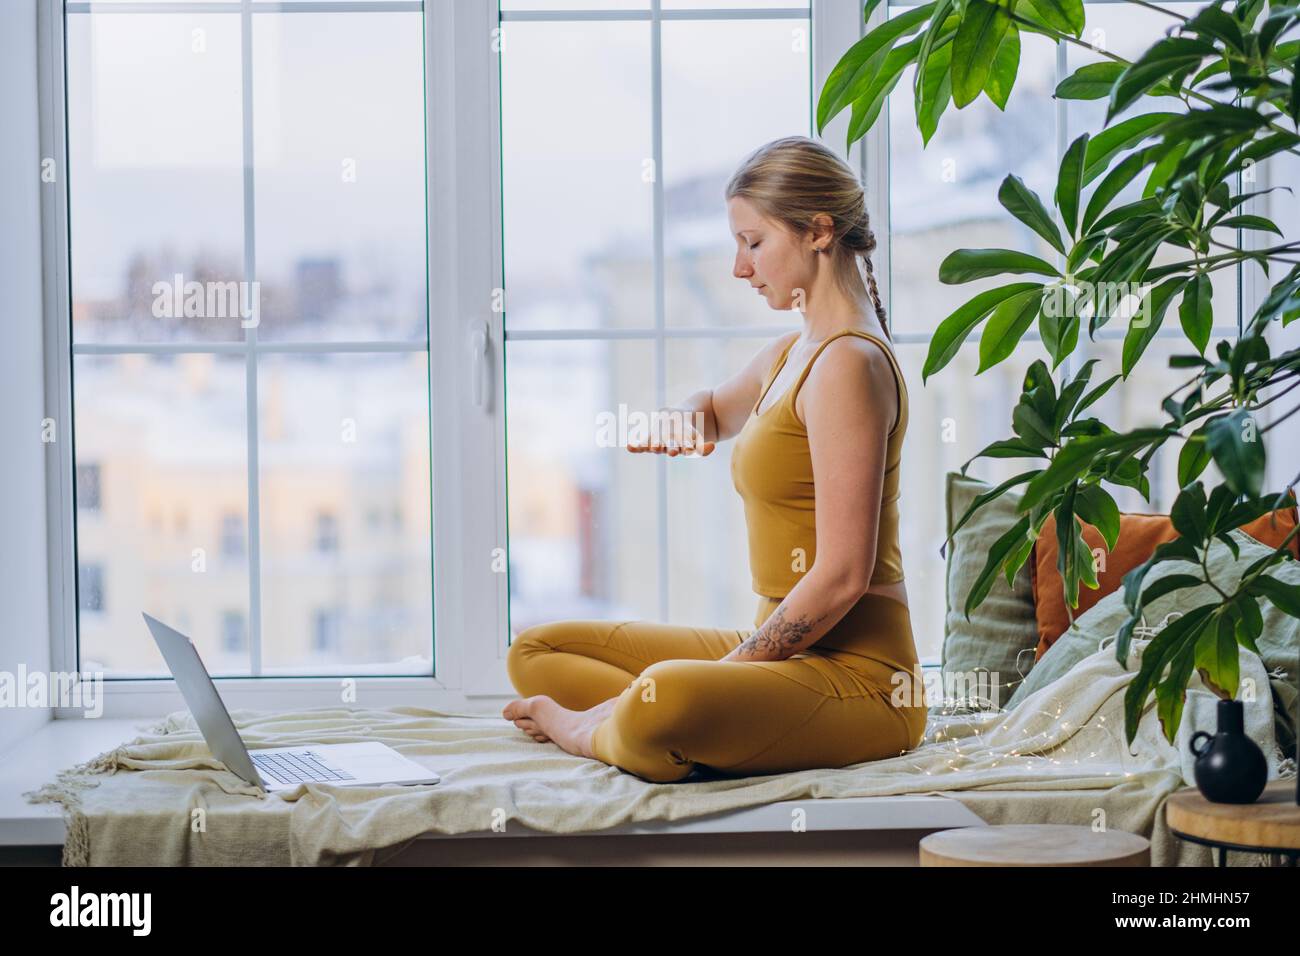 https://c8.alamy.com/comp/2HMHN57/blonde-young-woman-in-yellow-top-and-leggings-meditates-in-yoga-pose-sitting-on-windowsill-covered-with-blanket-and-pillows-using-laptop-2HMHN57.jpg